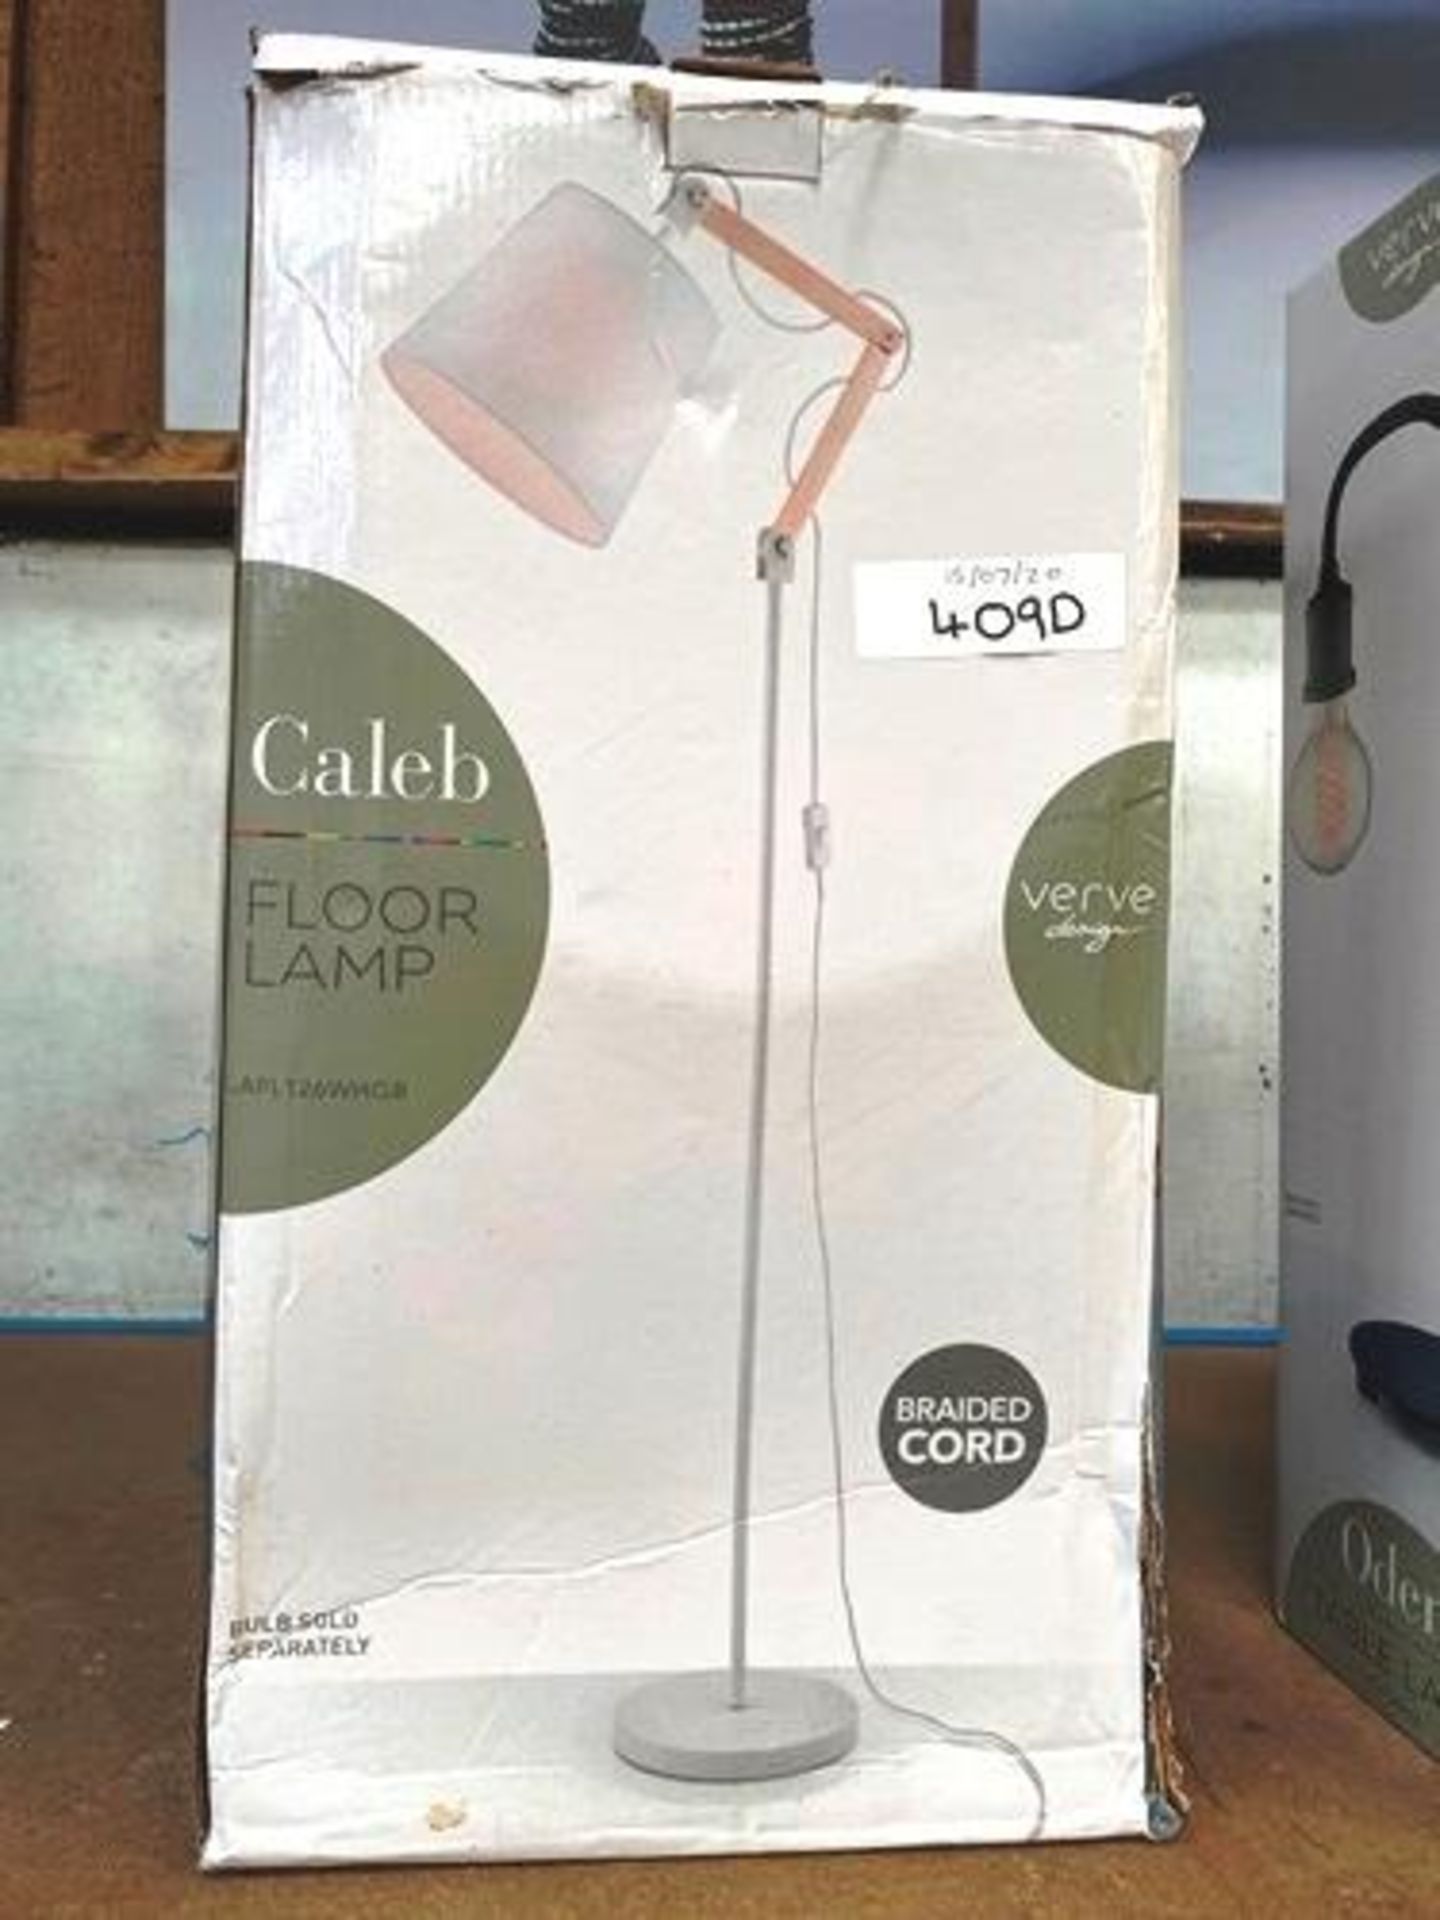 2 x Oden table lamps, 1 x Caleb floor lamp braided cord - New (GS29) - Image 2 of 2